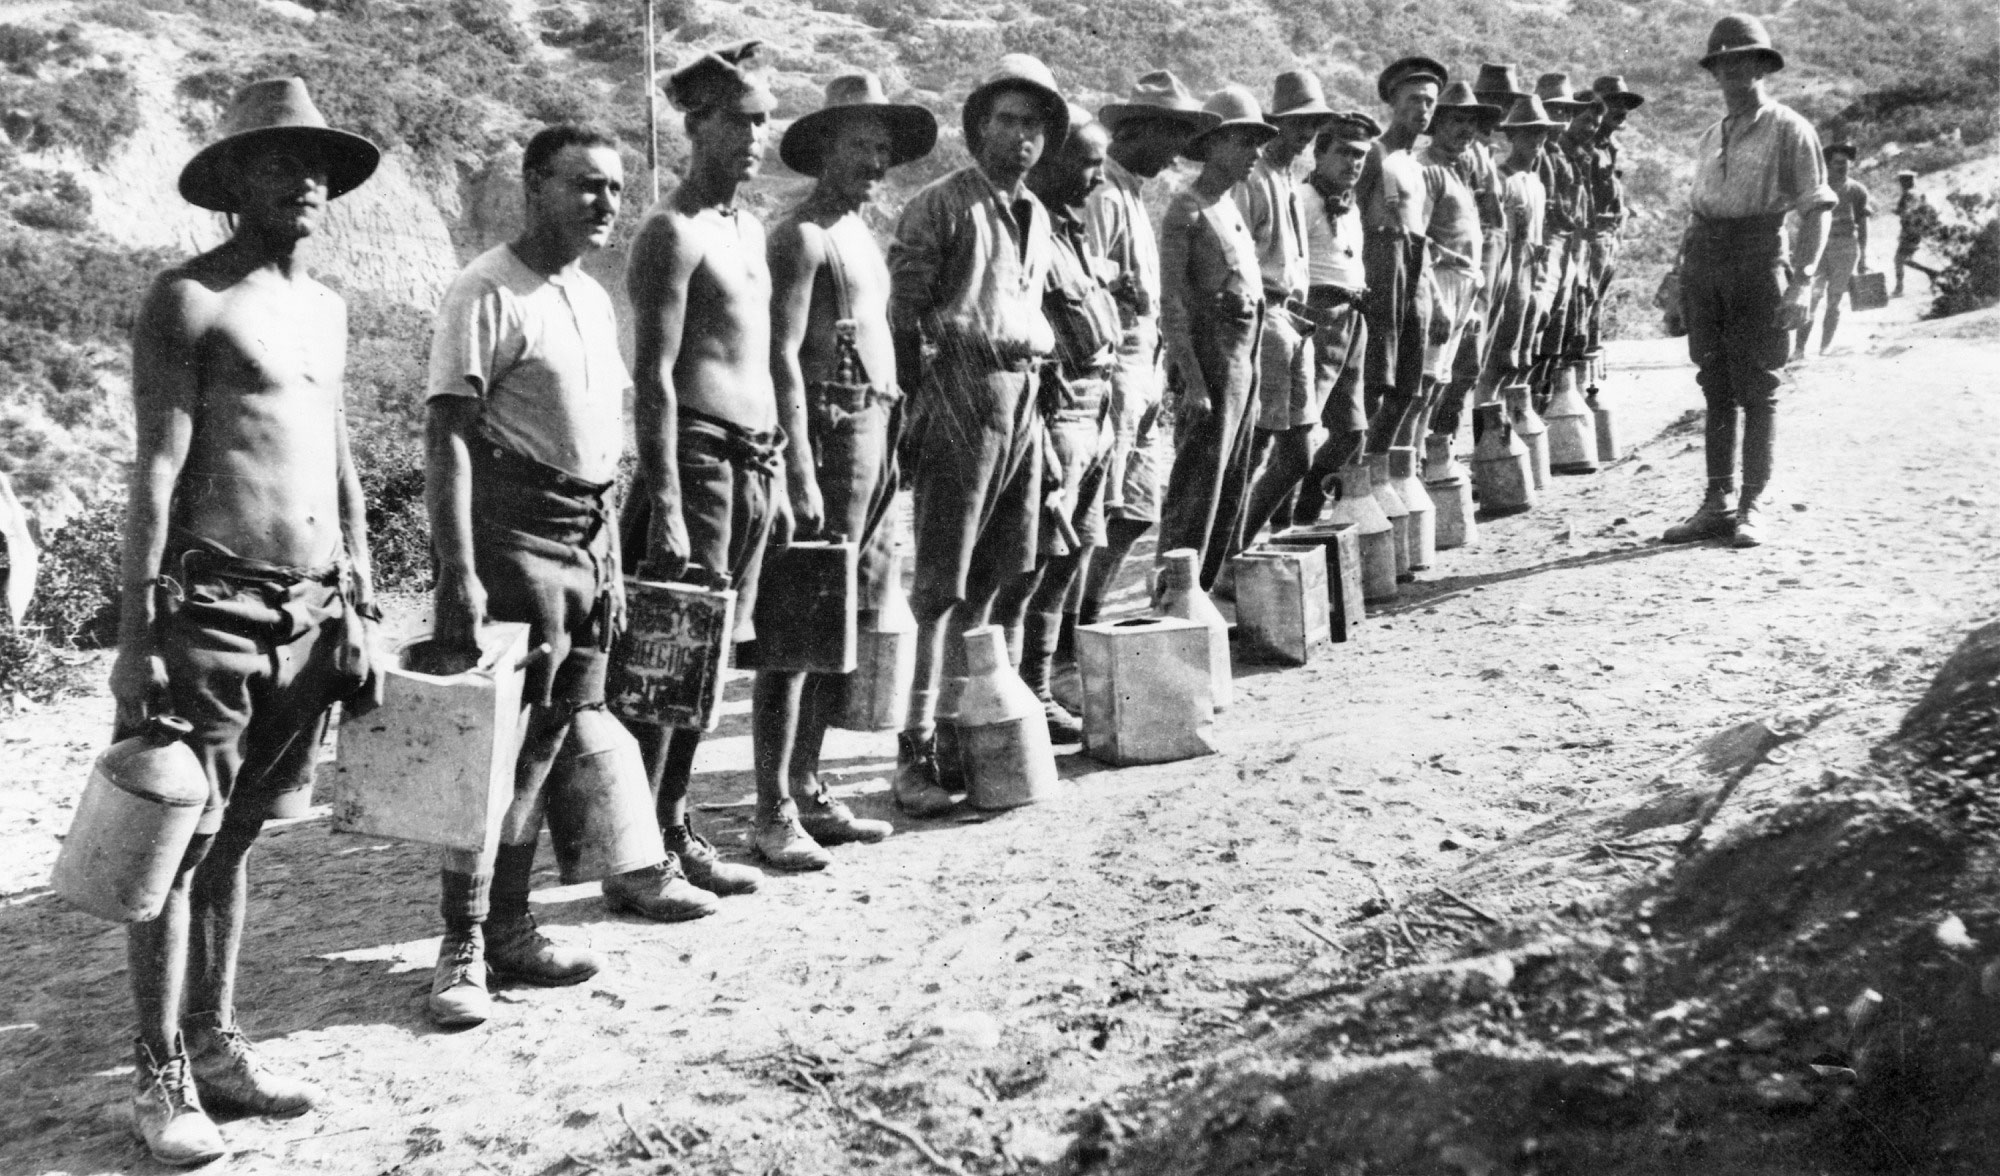 Soldiers line up for water, Gallipoli, 1915.